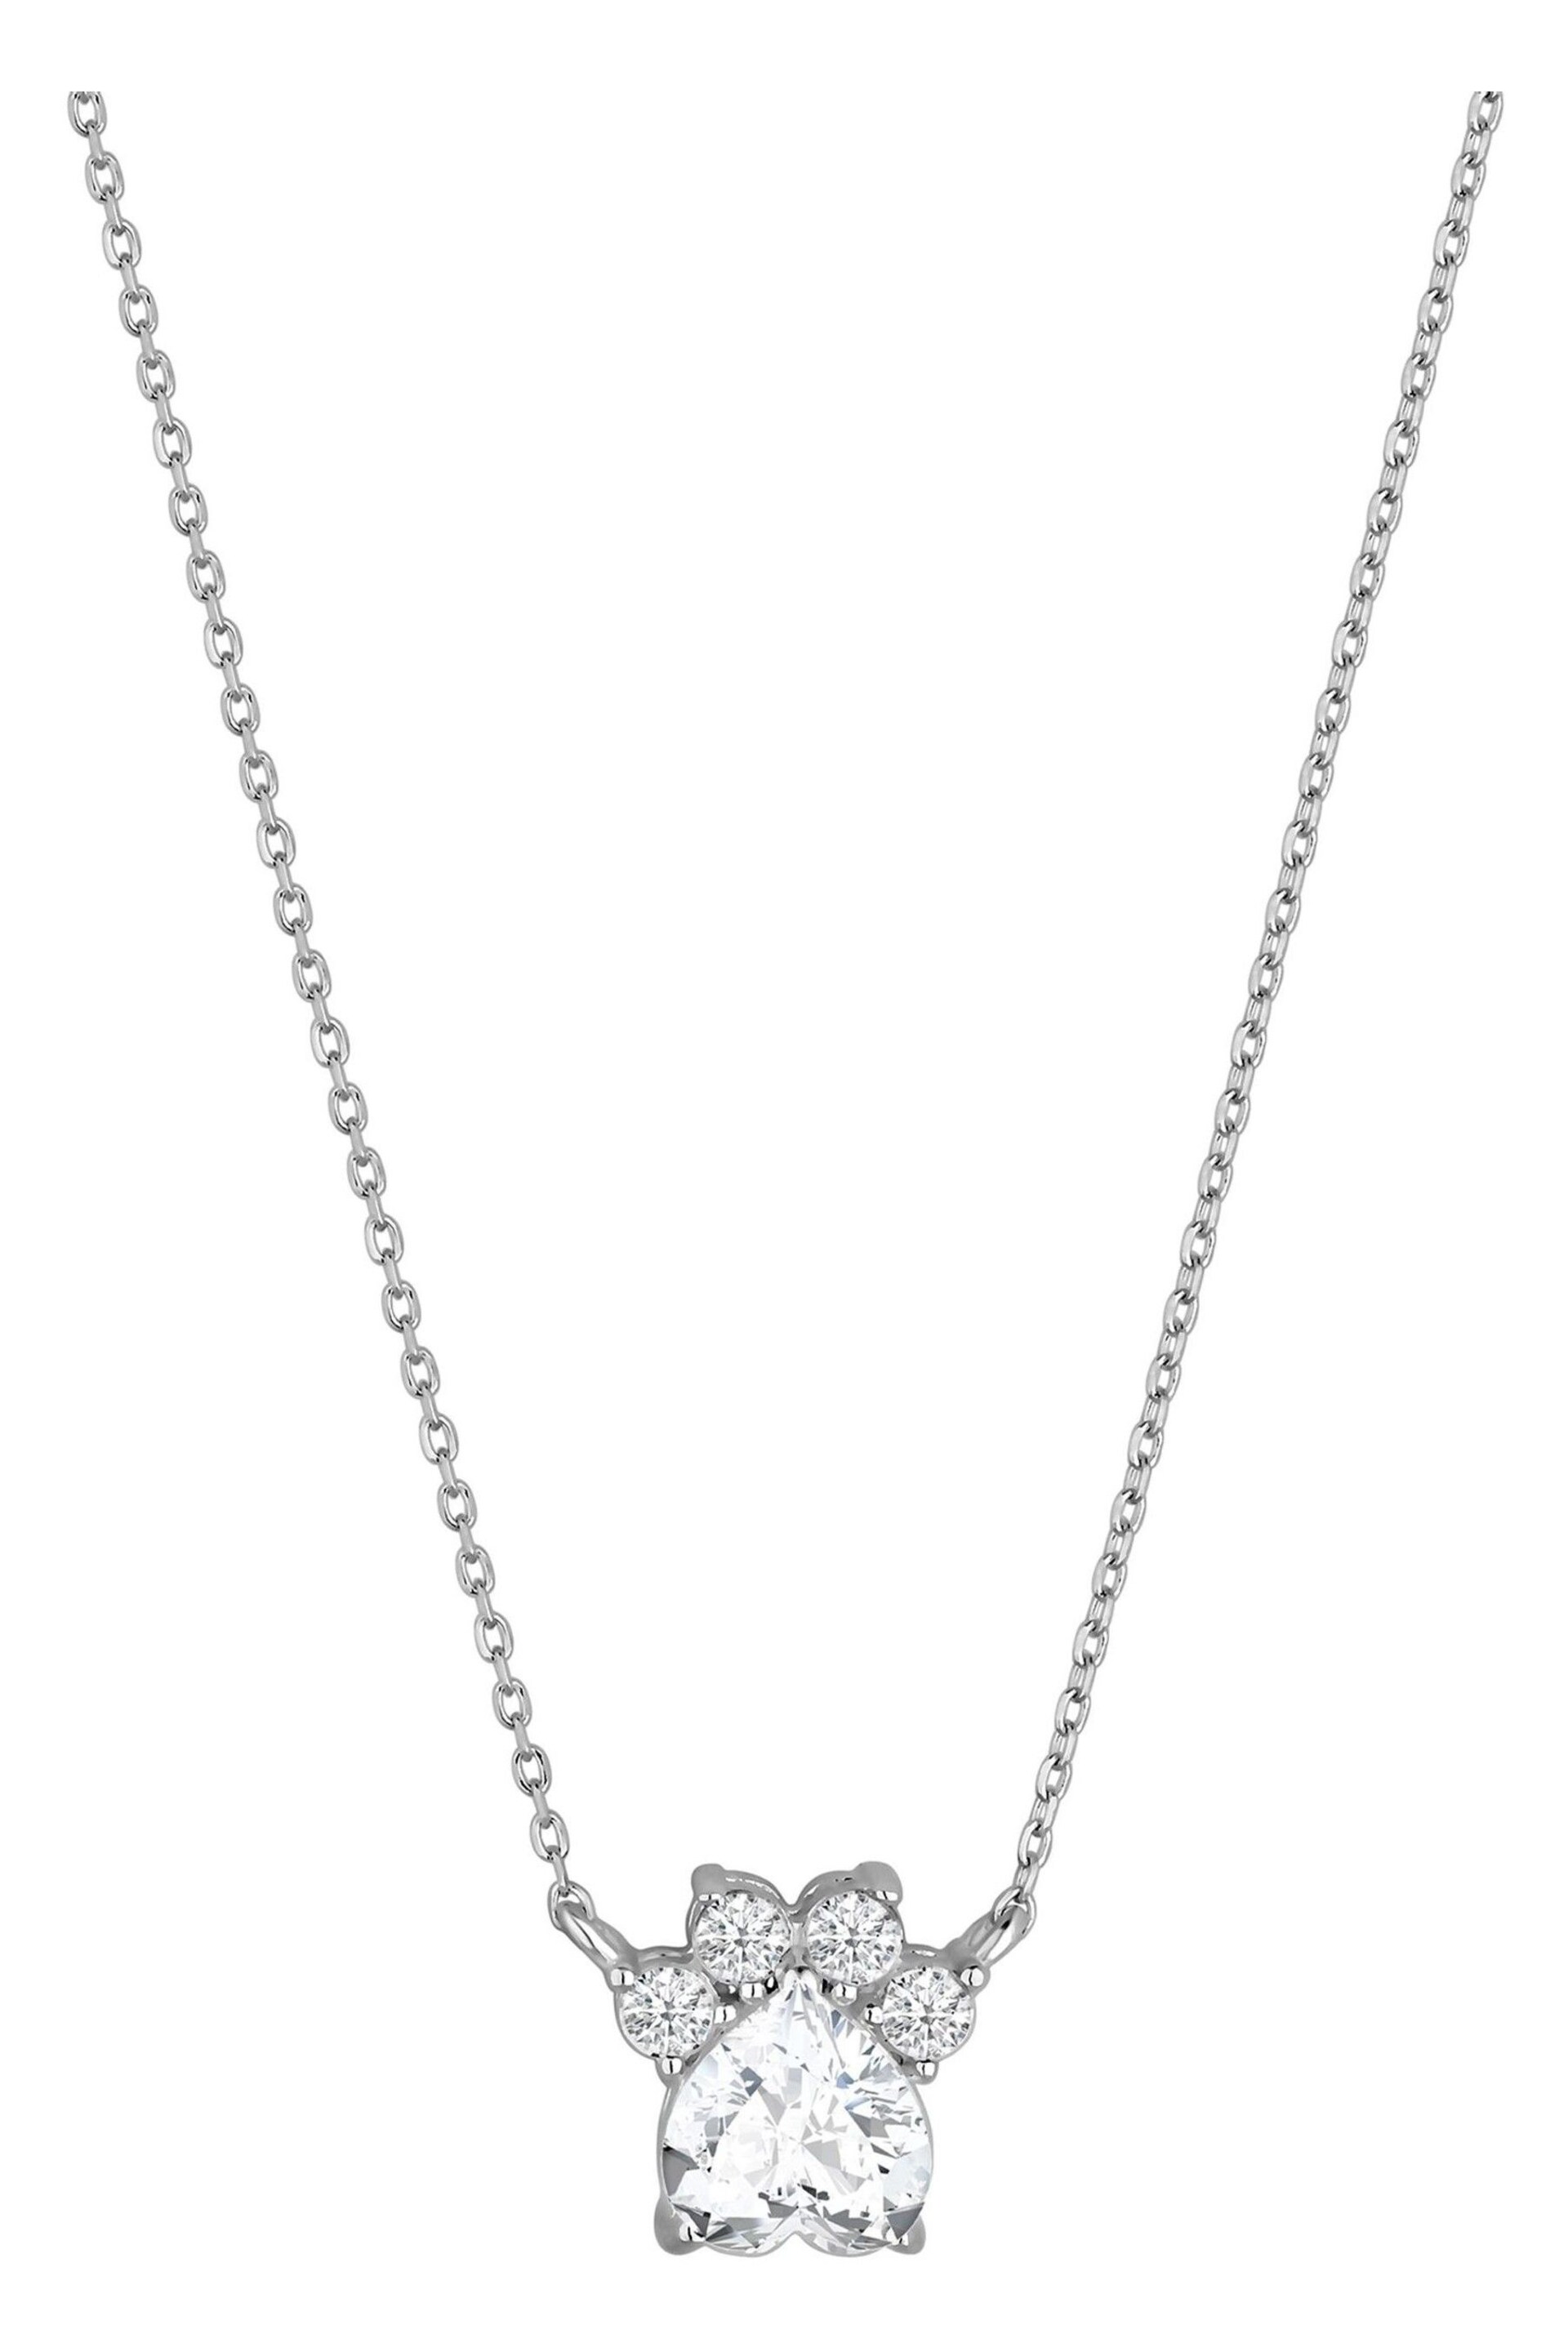 Simply Silver 925 Sterling Silver Cubic Zirconia Paw Print Pendant Necklace - Image 1 of 2